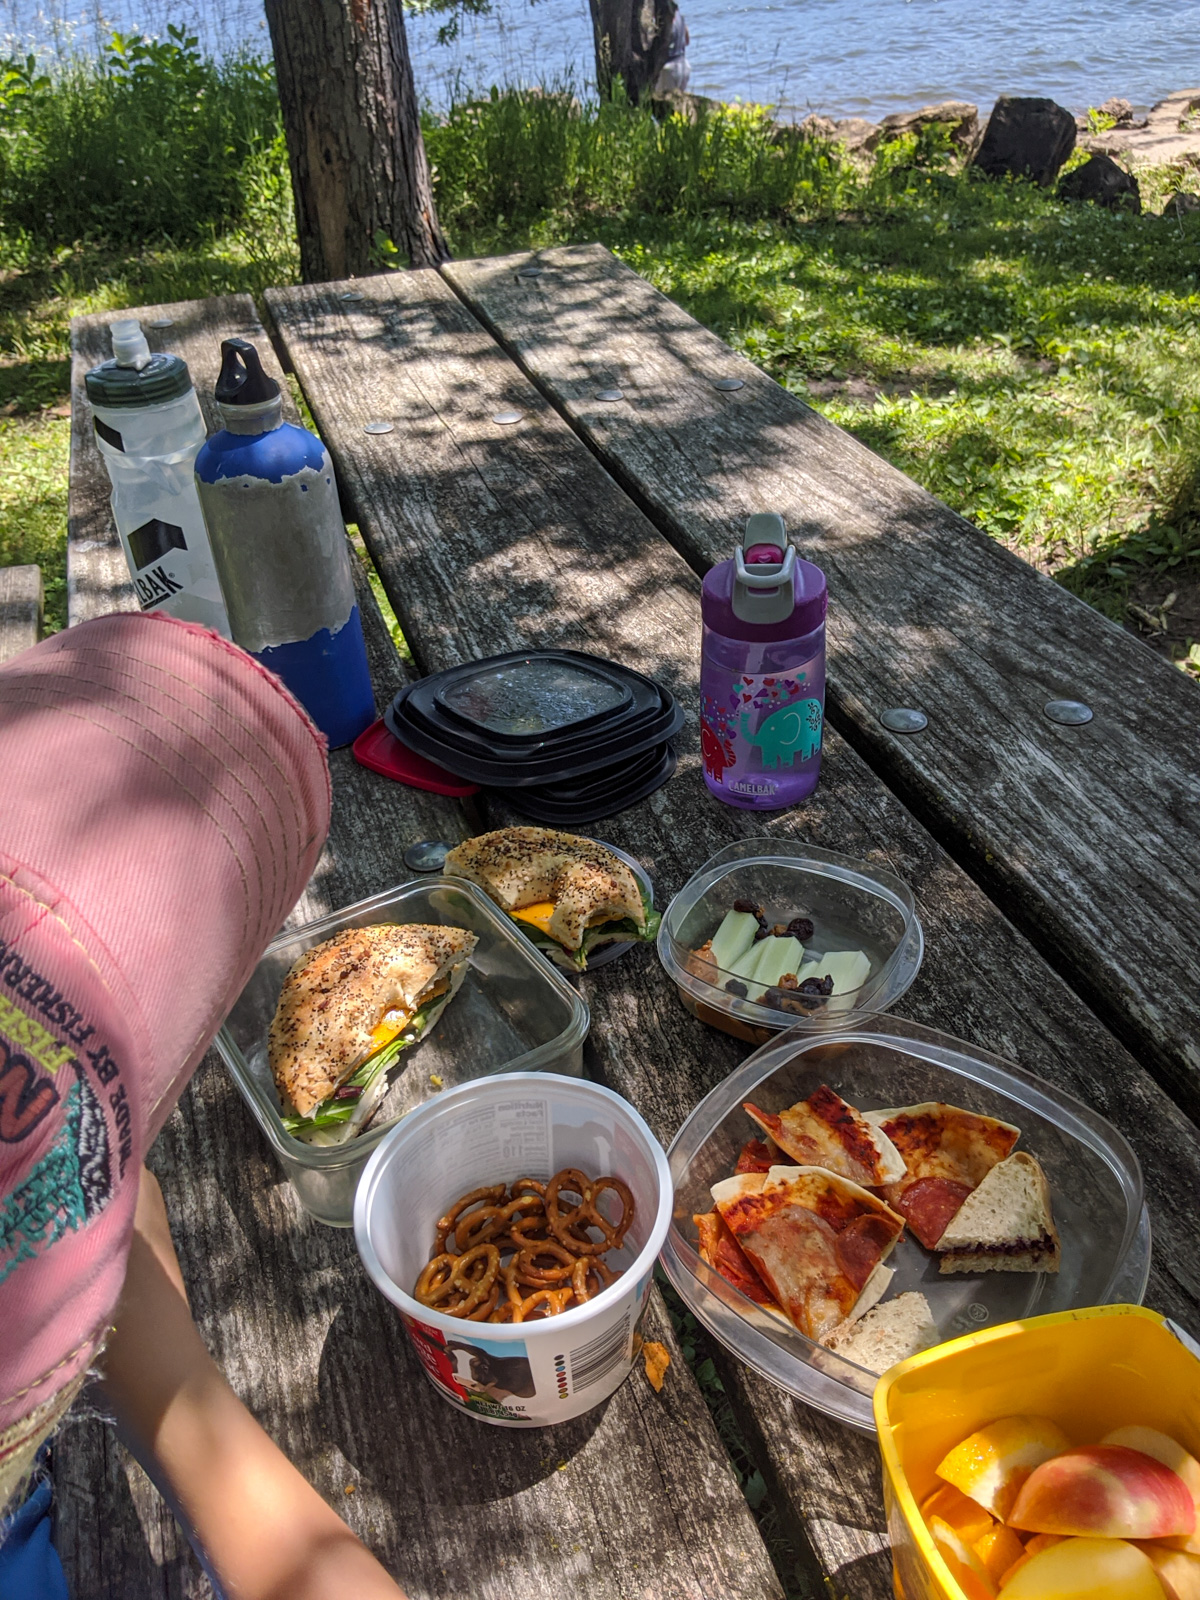 A kid's lunch to go on a picnic table by a lake.